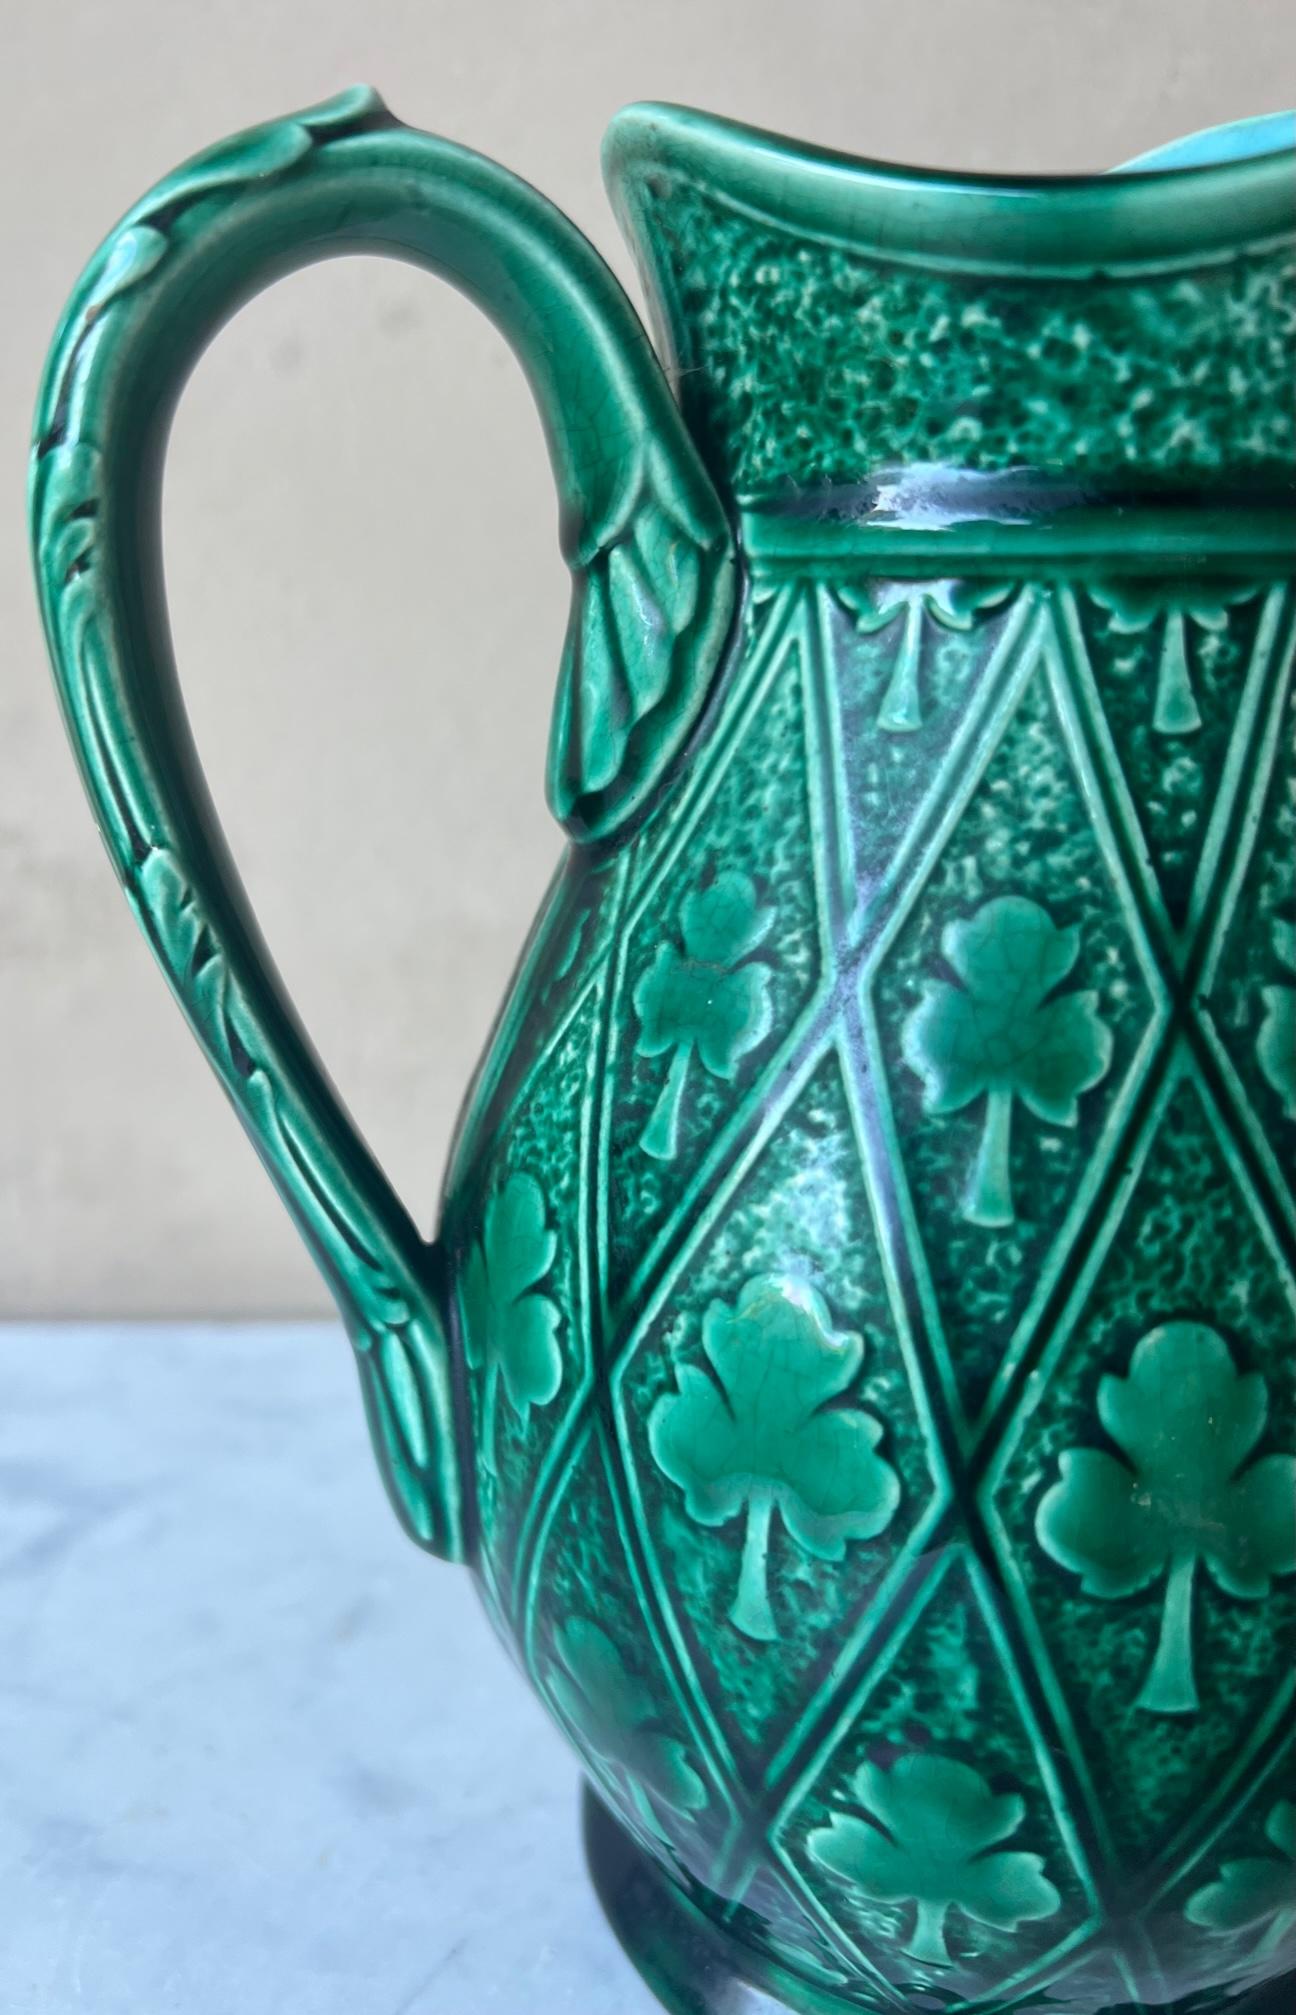 Vibrant green antique French majolica pitcher covered in clovers, made in France between 1875 and 1890. I've never seen another pitcher like this lucky one!